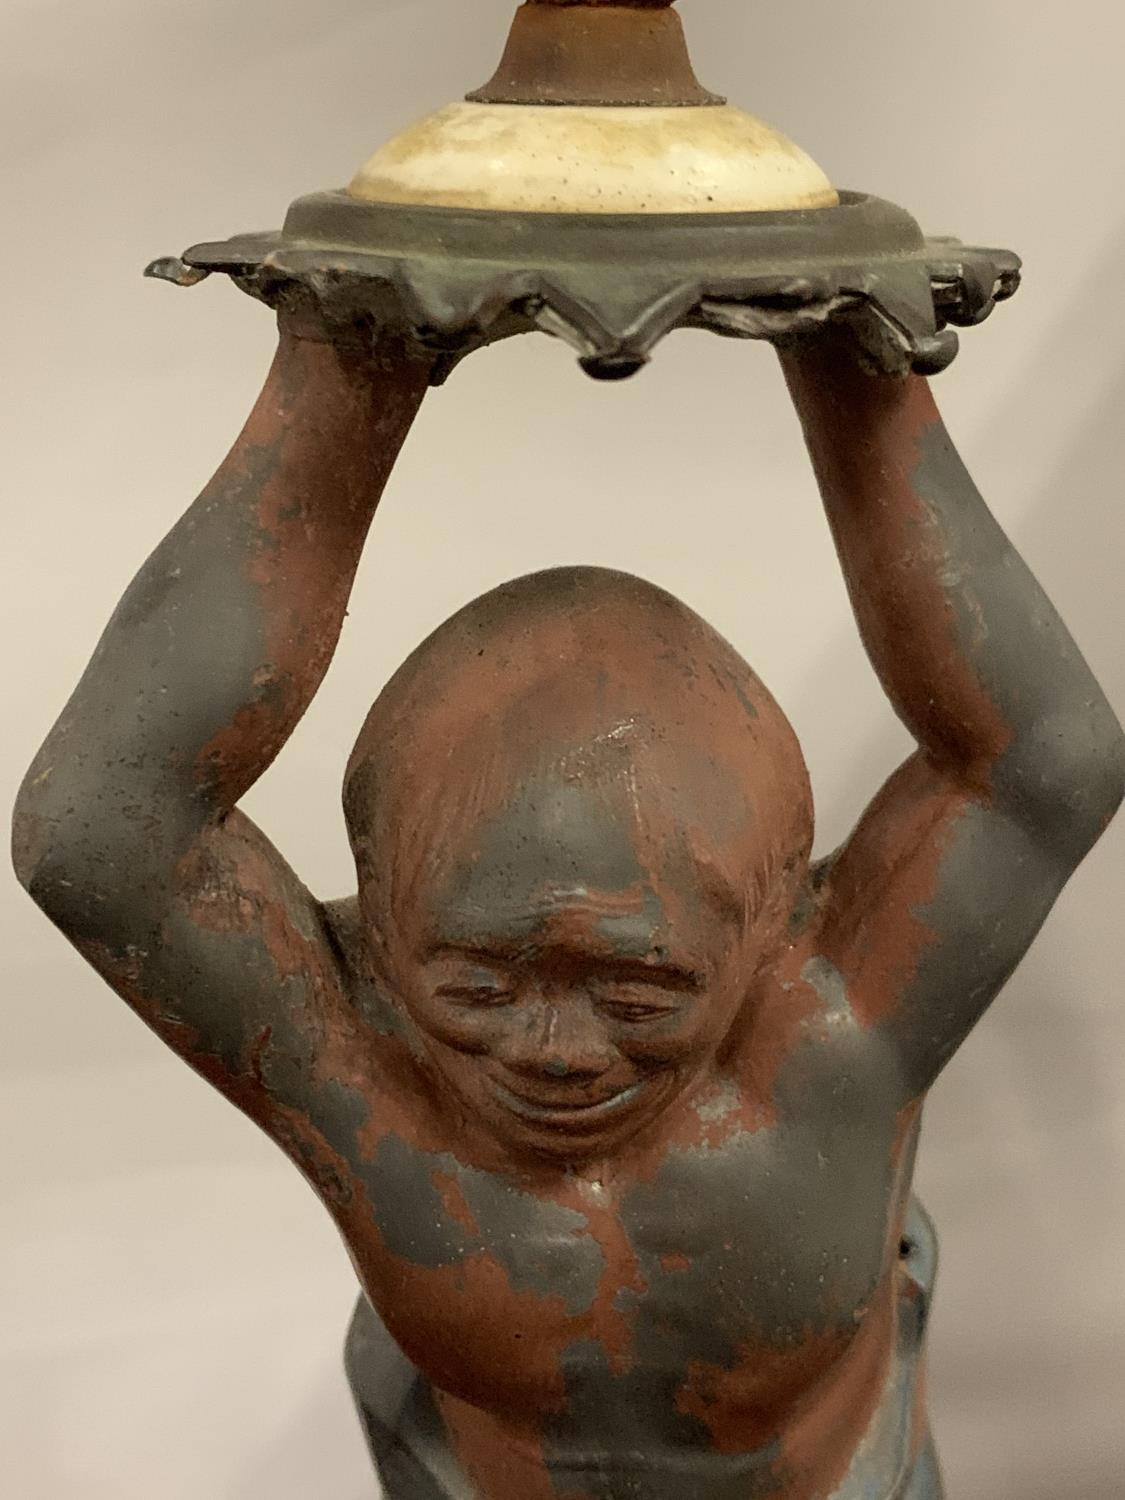 A VINTAGE FIGURINE IN THE FORM OF AN OCEAN ISLANDER - Image 4 of 4